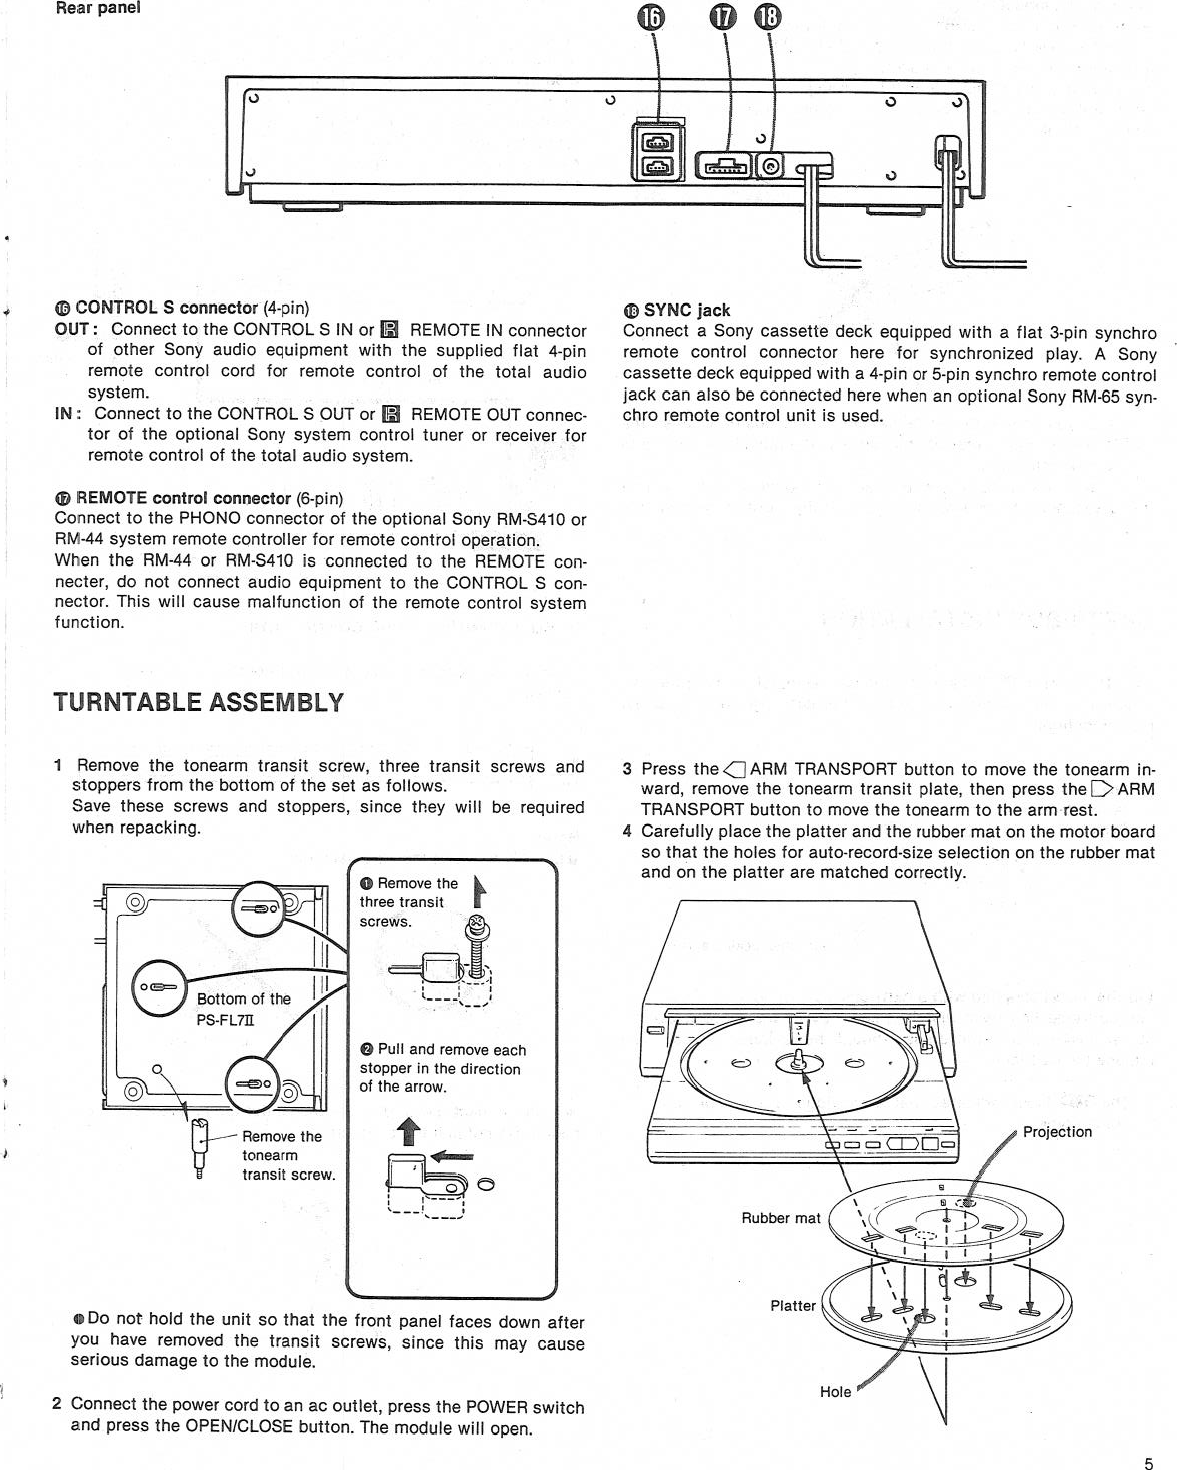 Page 5 of 11 - Sony Sony-Sony-Turntable-Ps-Fl7-Ii-Users-Manual-  Sony-sony-turntable-ps-fl7-ii-users-manual